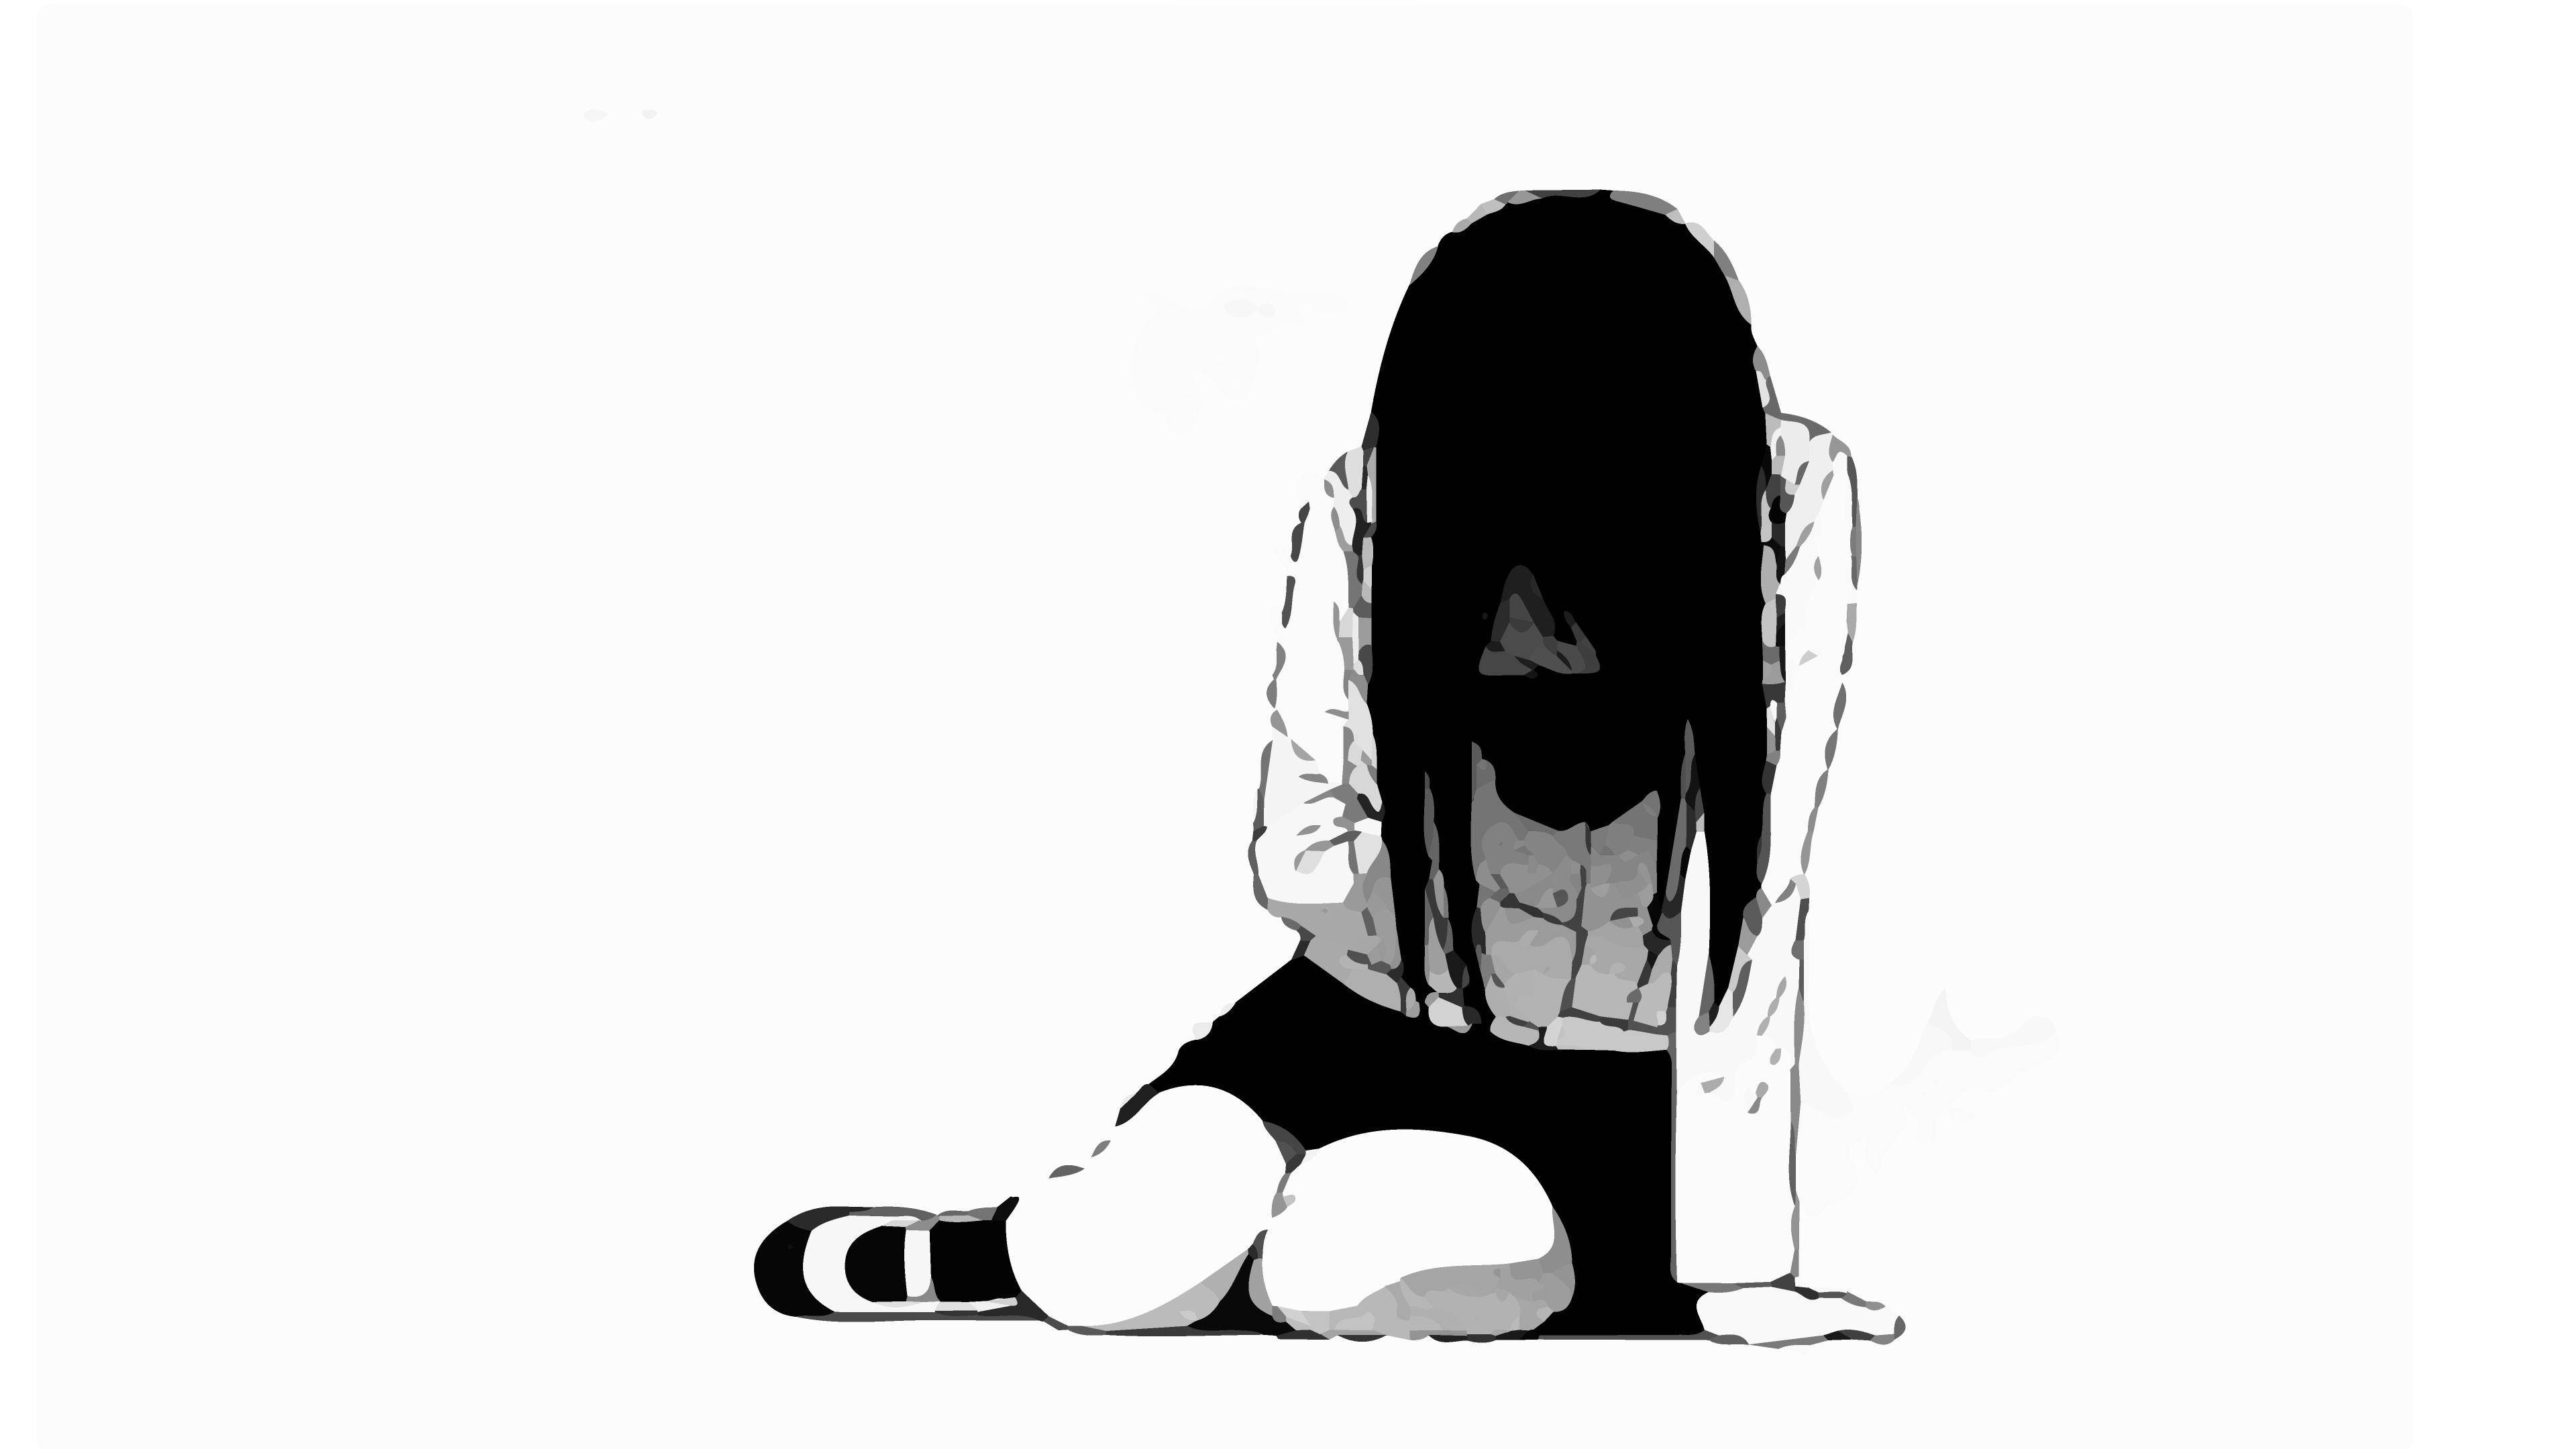 Download Emotional And Sad Anime Girl Black And White Wallpaper | Wallpapers .com